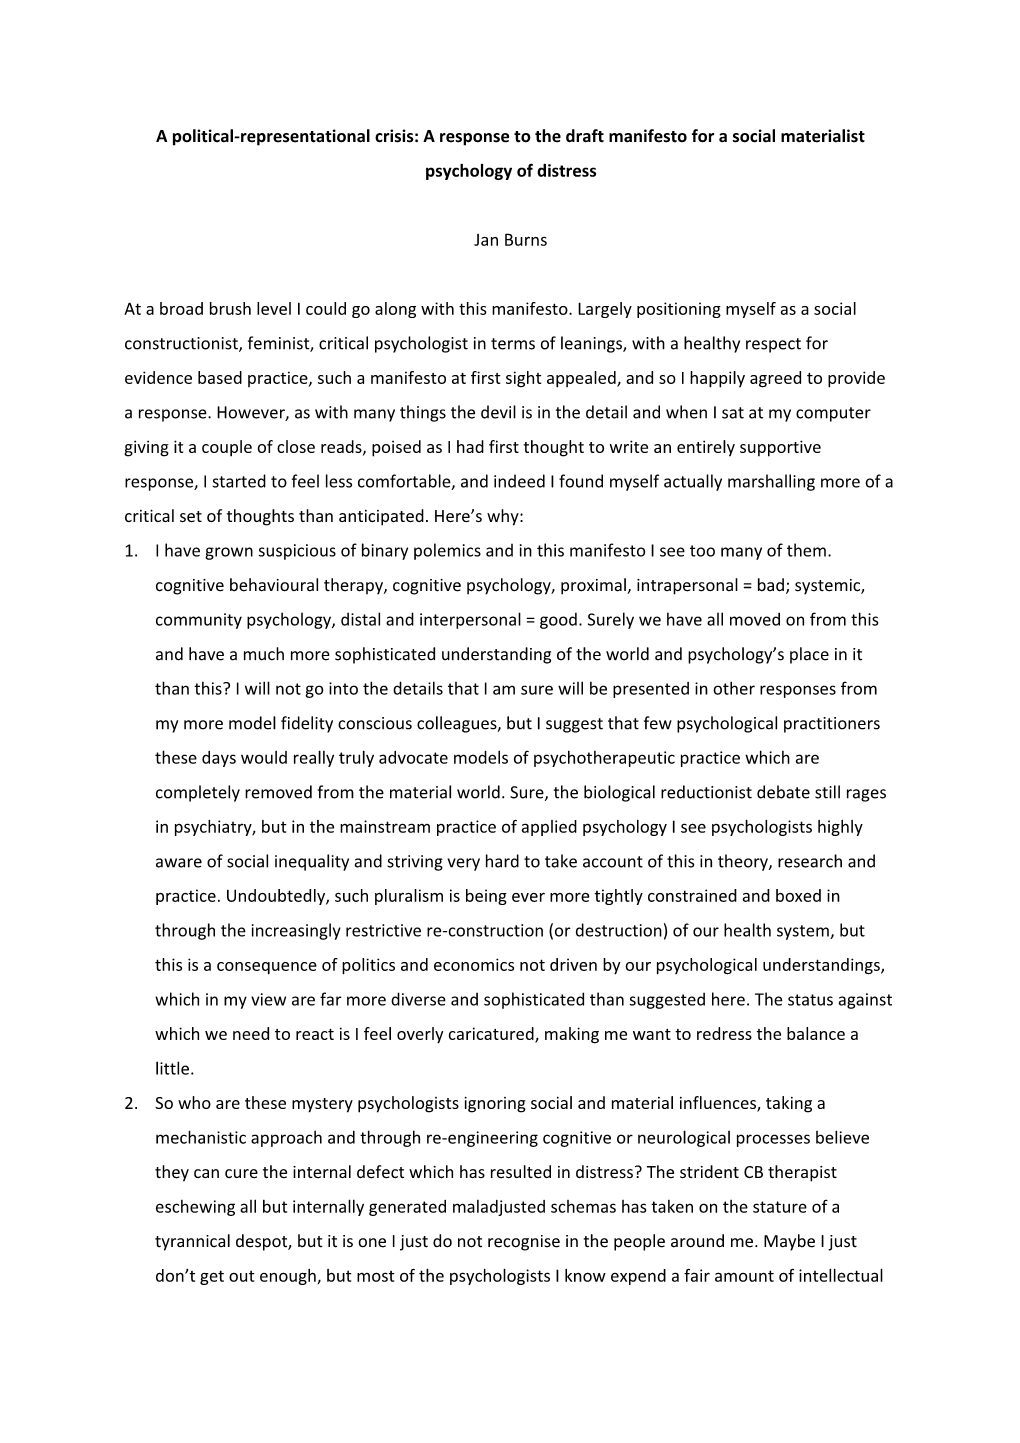 A Political-Representational Crisis: a Response to the Draft Manifesto for a Social Materialist